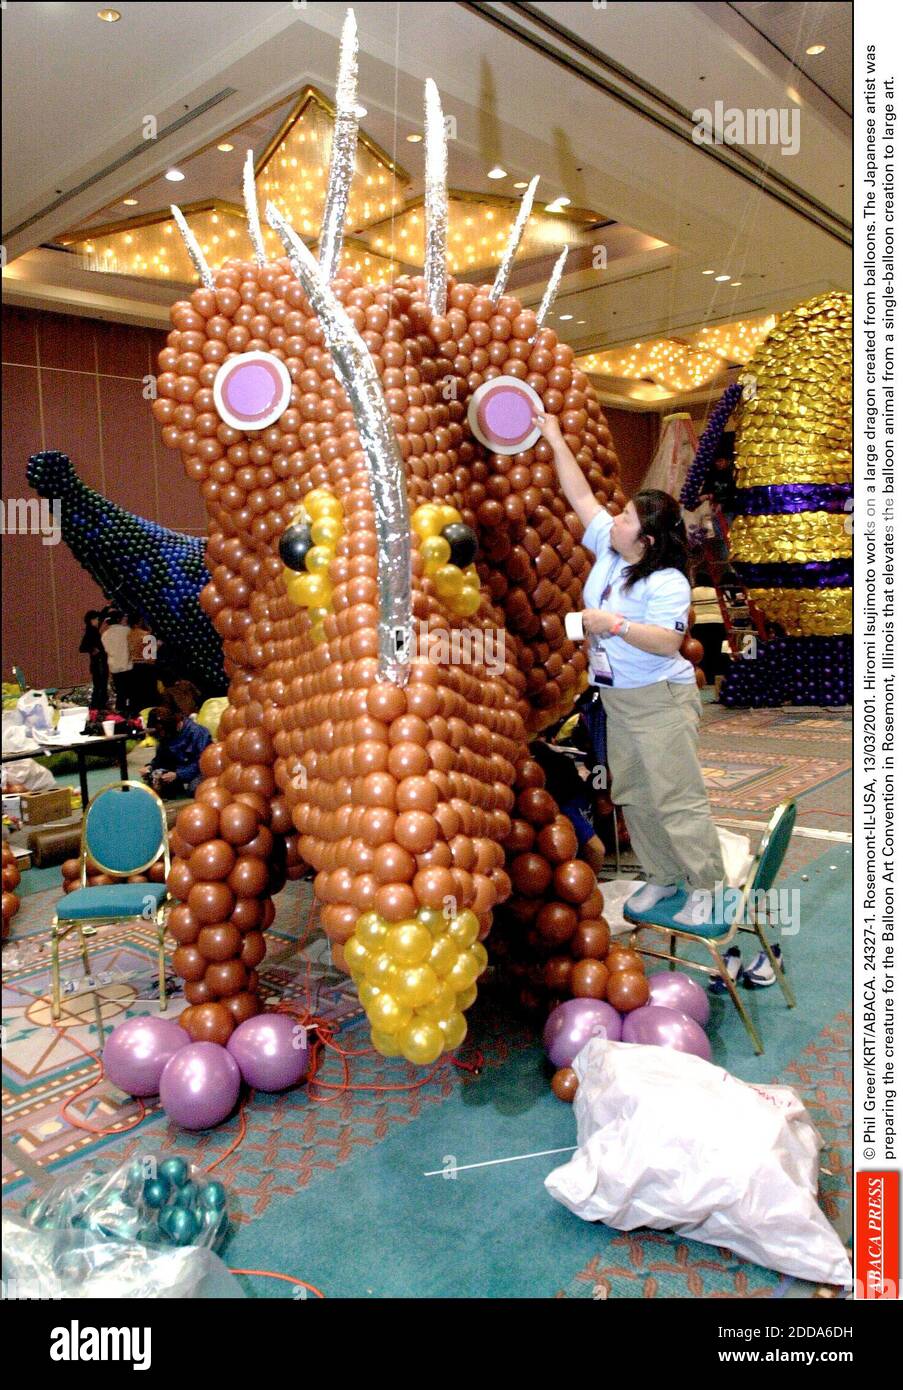 NO FILM, NO VIDEO, NO TV, NO DOCUMENTARY - © Phil Greer/KRT/ABACA. 24327-1.  Rosemont-IL-USA, 13/03/2001. Hiromi Isujimoto works on a large dragon  created from balloons. The Japanese artist was preparing the creature